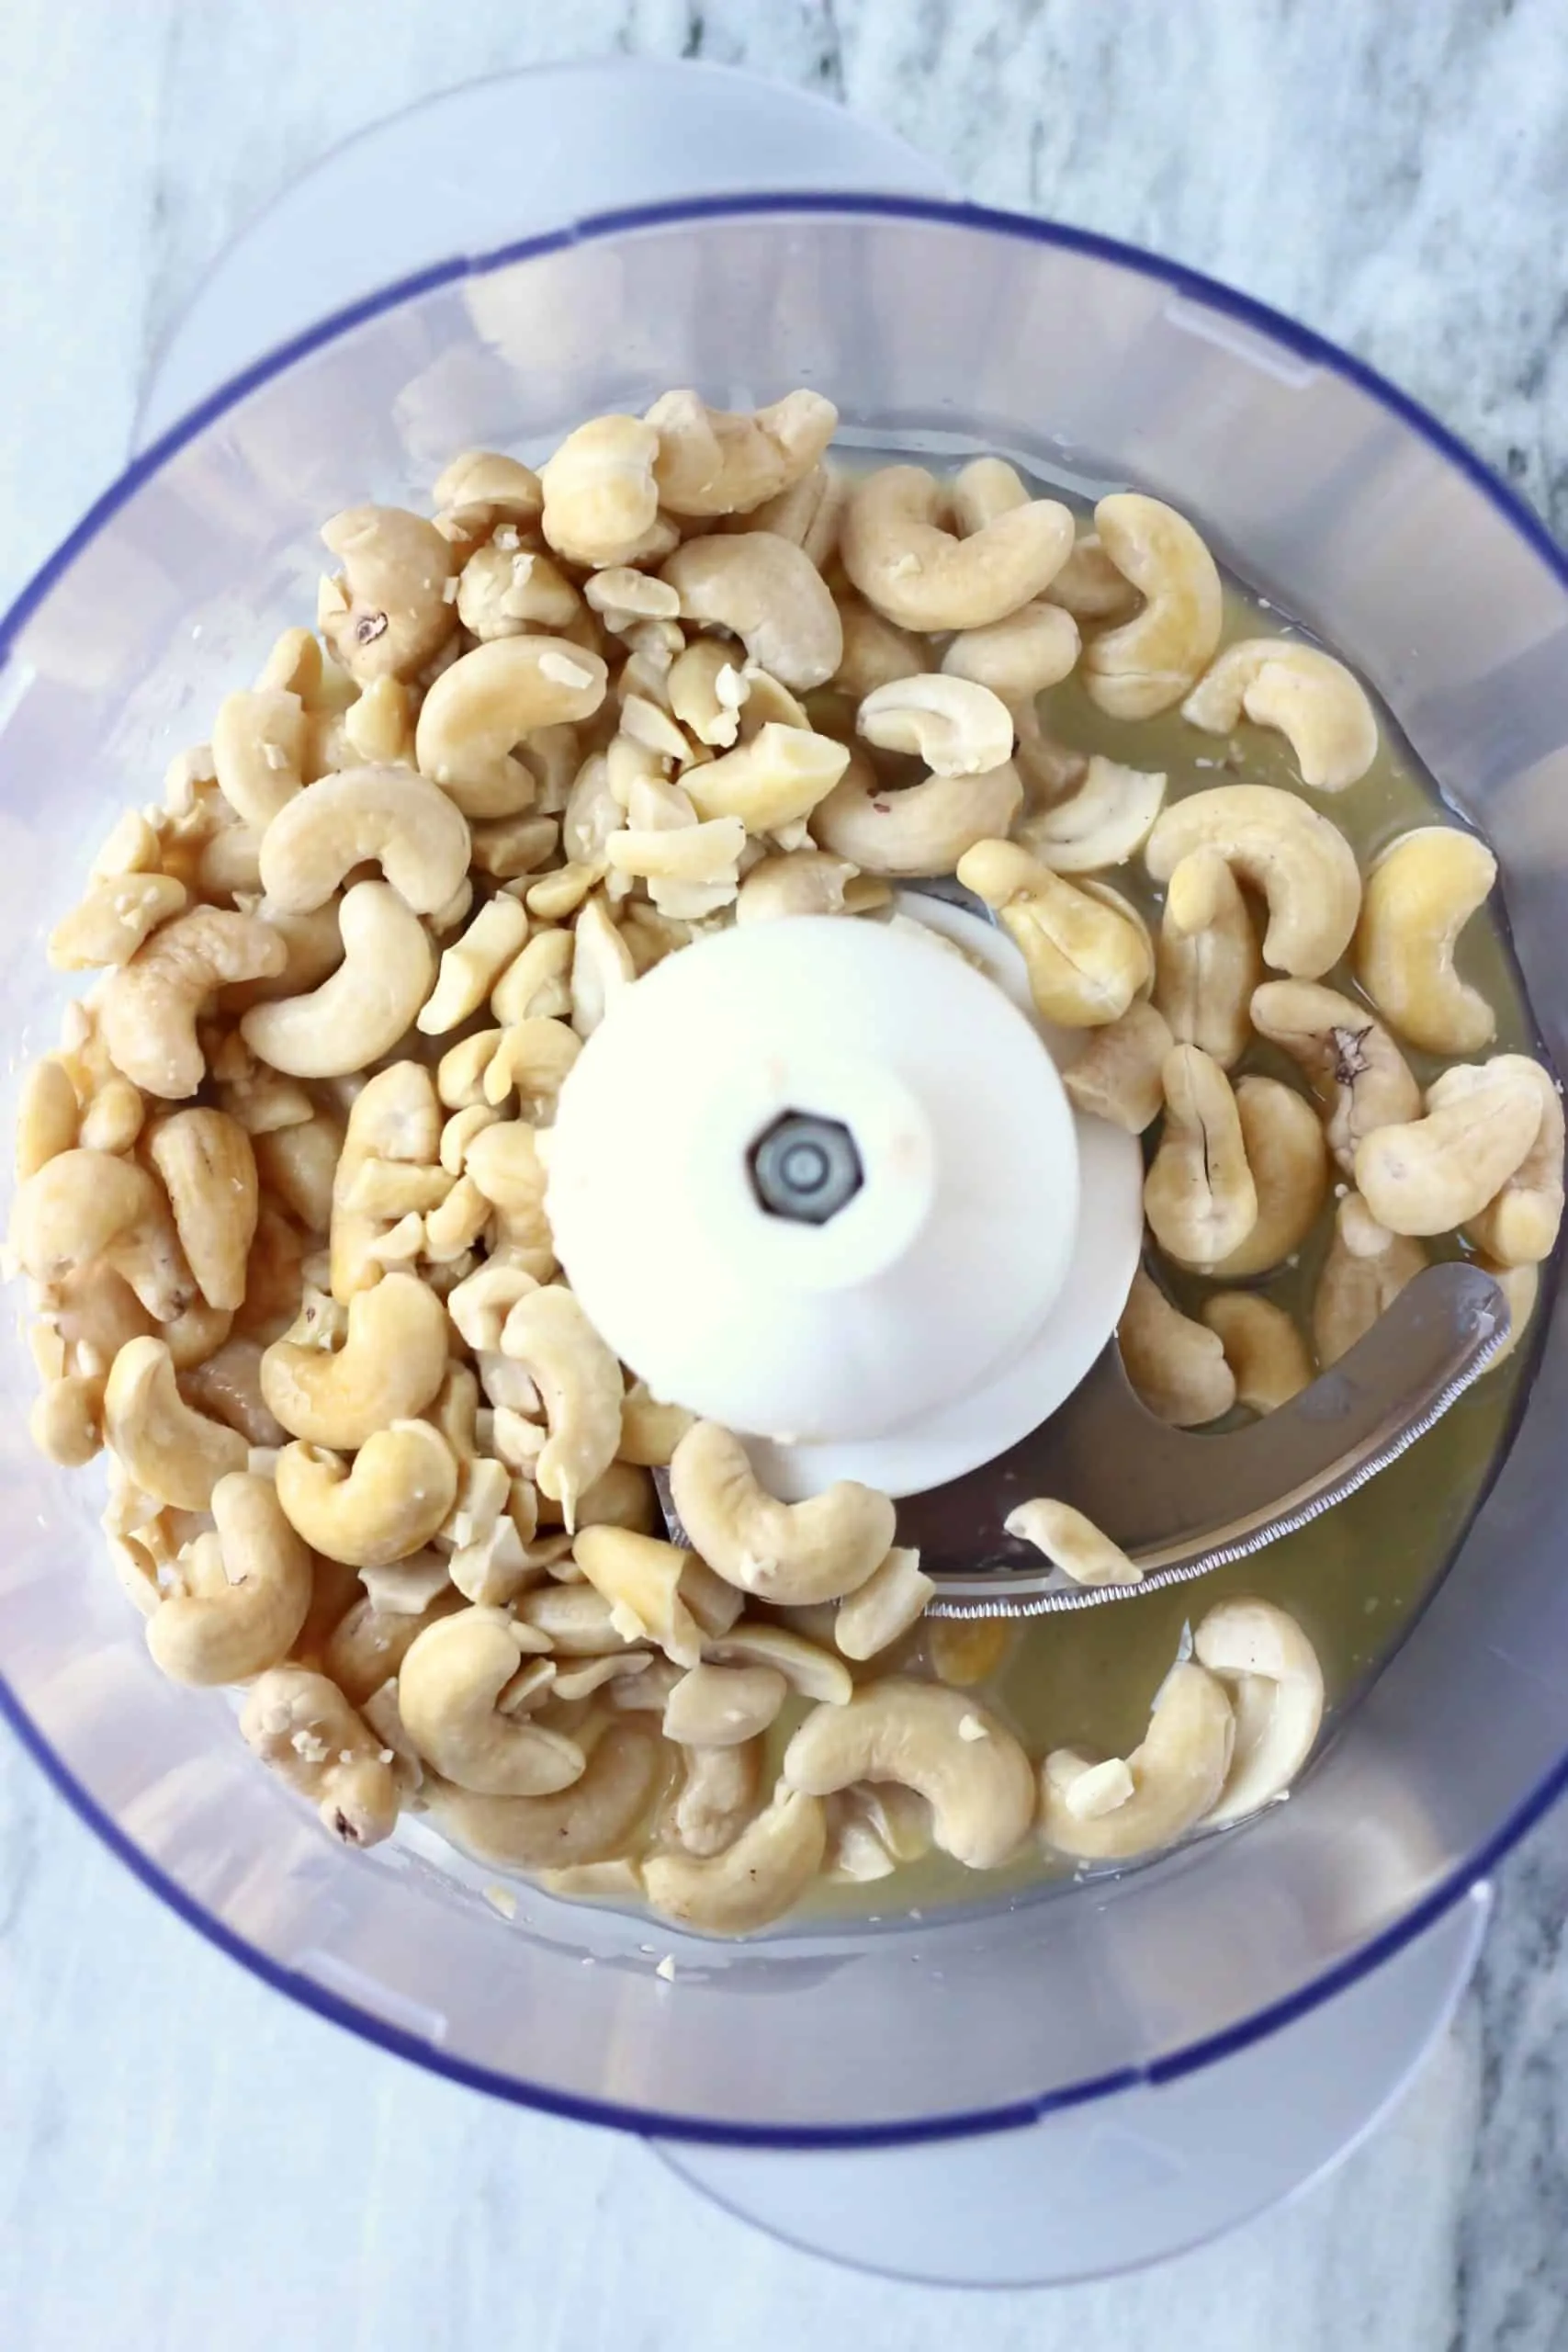 Cashew nuts, lemon juice, maple syrup and plant-based milk in a food processor